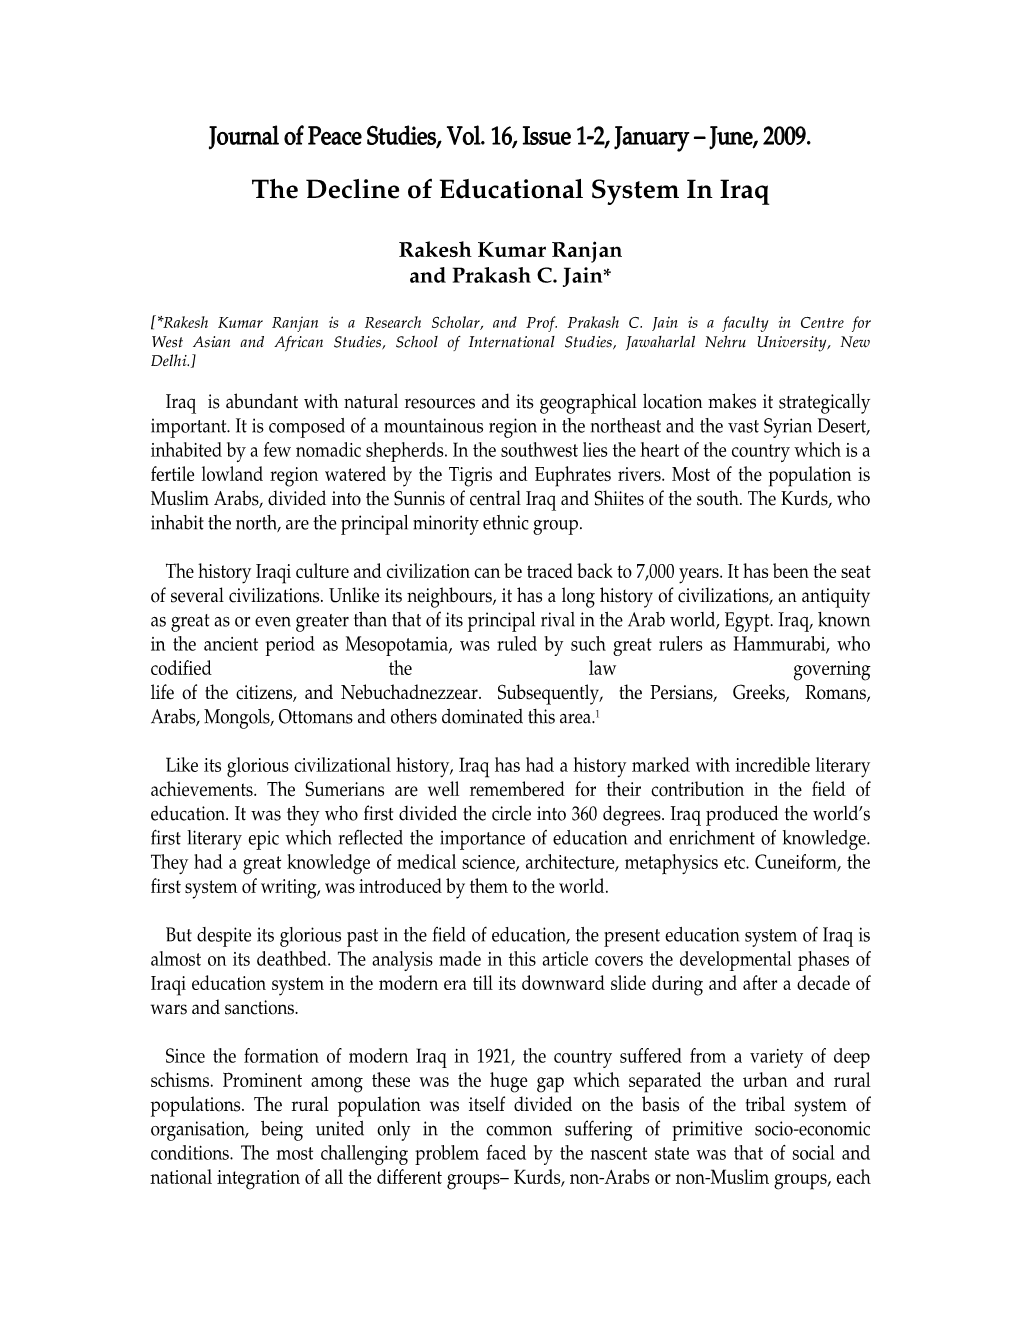 The Decline of Educational System in Iraq